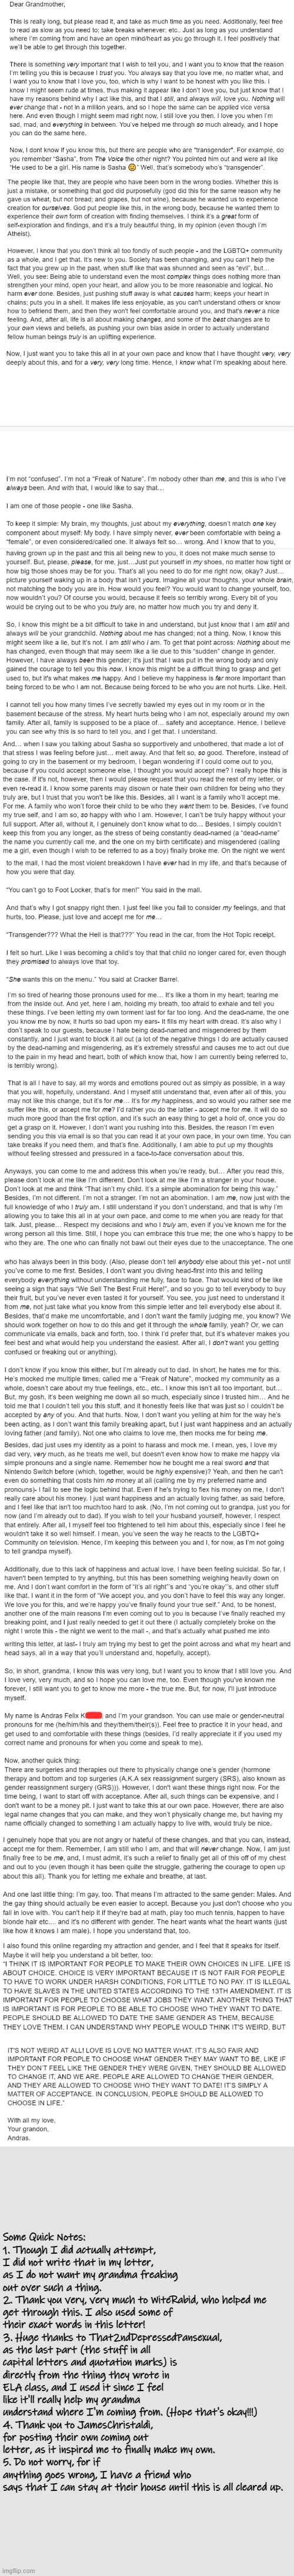 I know it's really long, but any feedback would be great! I did my best with portraying my true feelings and emotions here. | Some Quick Notes:
1. Though I did actually attempt, I did not write that in my letter, as I do not want my grandma freaking out over such a thing.
2. Thank you very, very much to WiteRabid, who helped me get through this. I also used some of their exact words in this letter!
3. Huge thanks to That2ndDepressedPansexual, as the last part (the stuff in all capital letters and quotation marks) is directly from the thing they wrote in ELA class, and I used it since I feel like it'll really help my grandma understand where I'm coming from. (Hope that's okay!!!)
4. Thank you to JamesChristaldi, for posting their own coming out letter, as it inspired me to finally make my own.
5. Do not worry, for if anything goes wrong, I have a friend who says that I can stay at their house until this is all cleared up. | image tagged in coming out,honest letter,emotions,feelings,gay pride,transgender | made w/ Imgflip meme maker